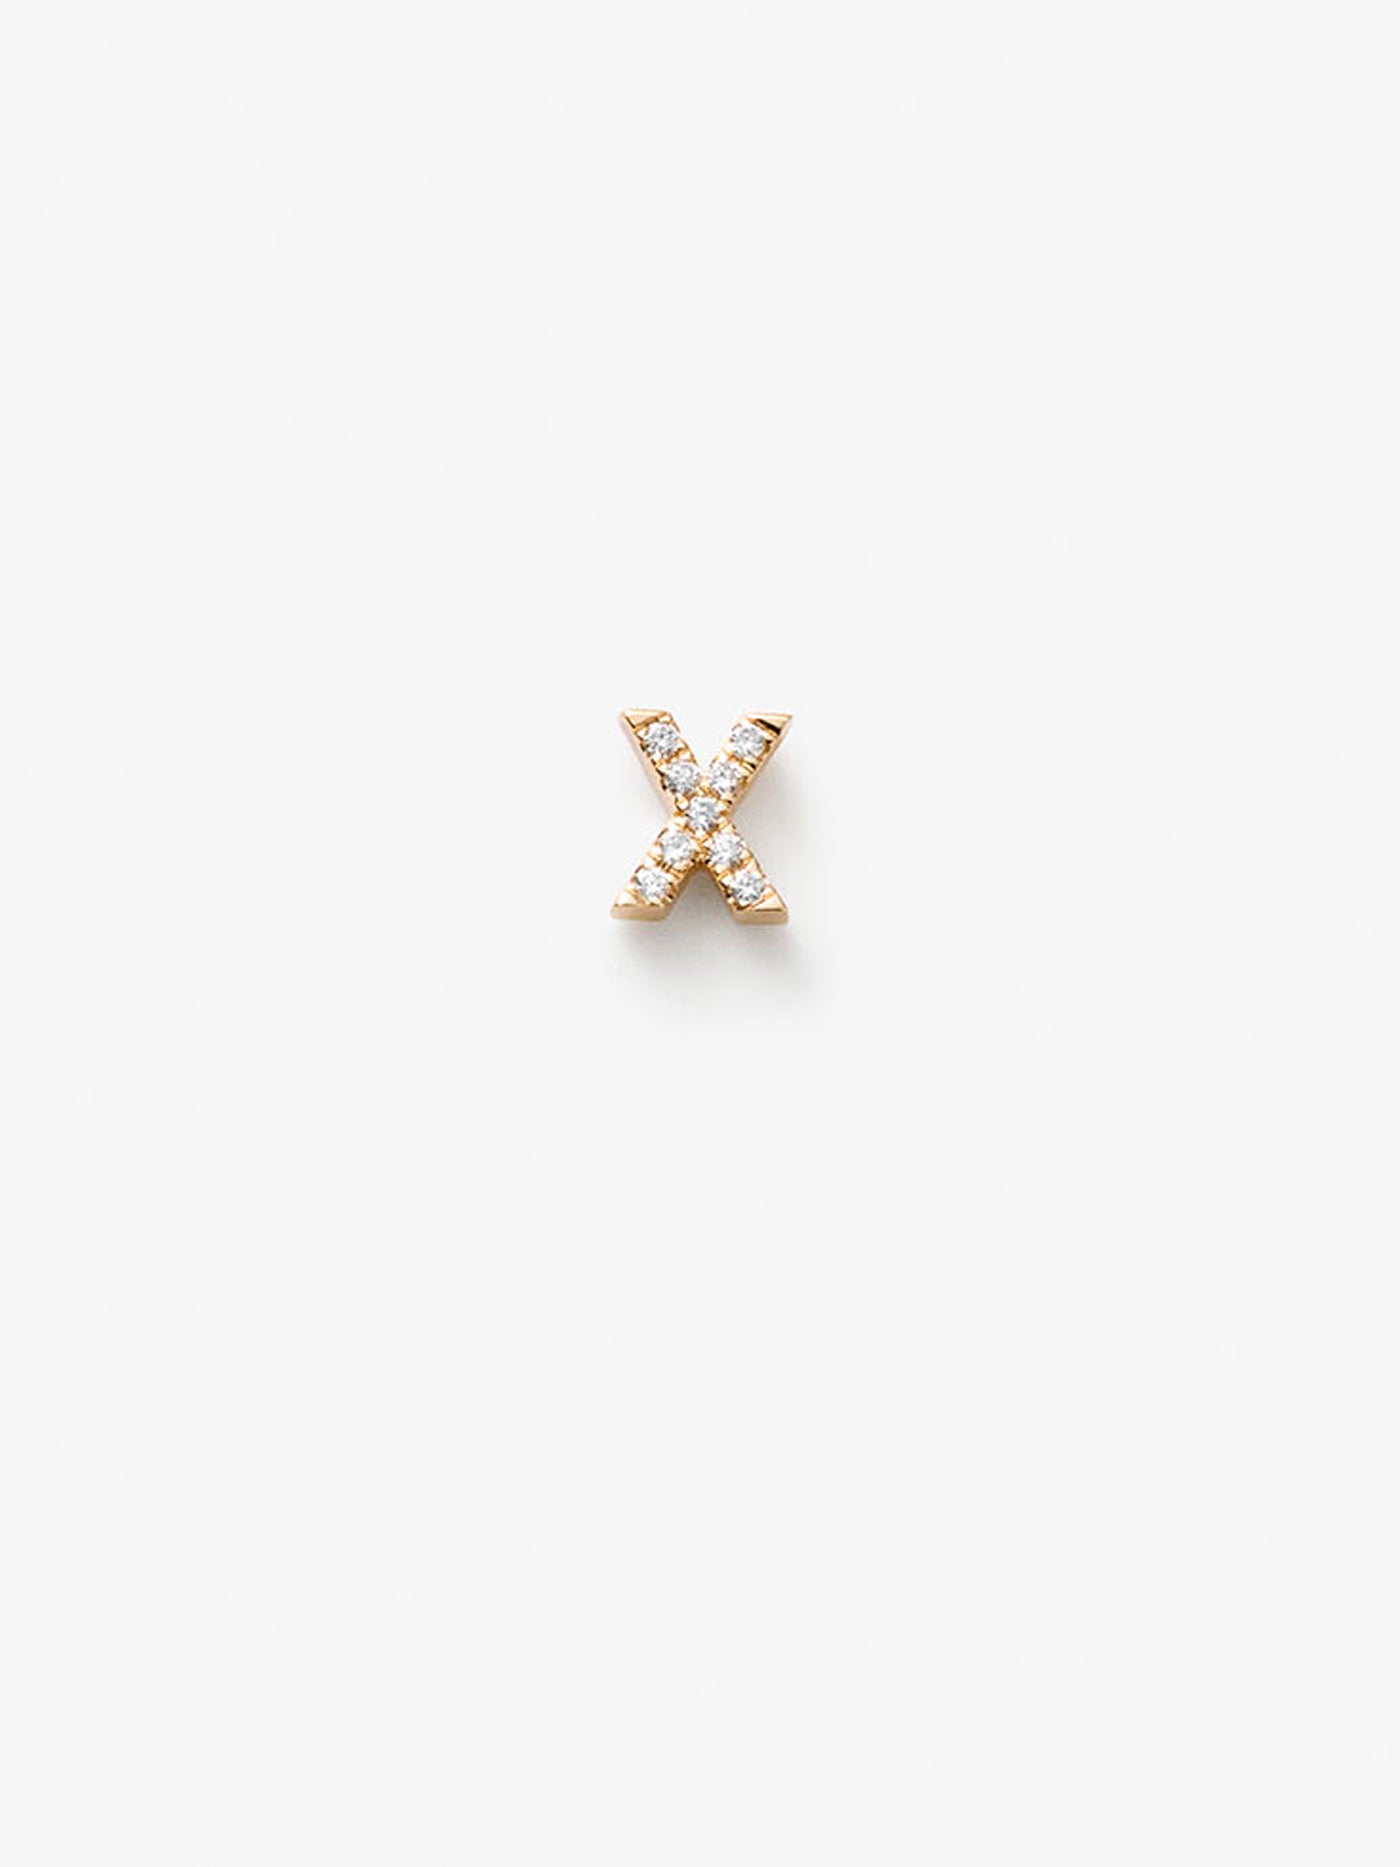 Letter X in Diamonds and 18k Gold